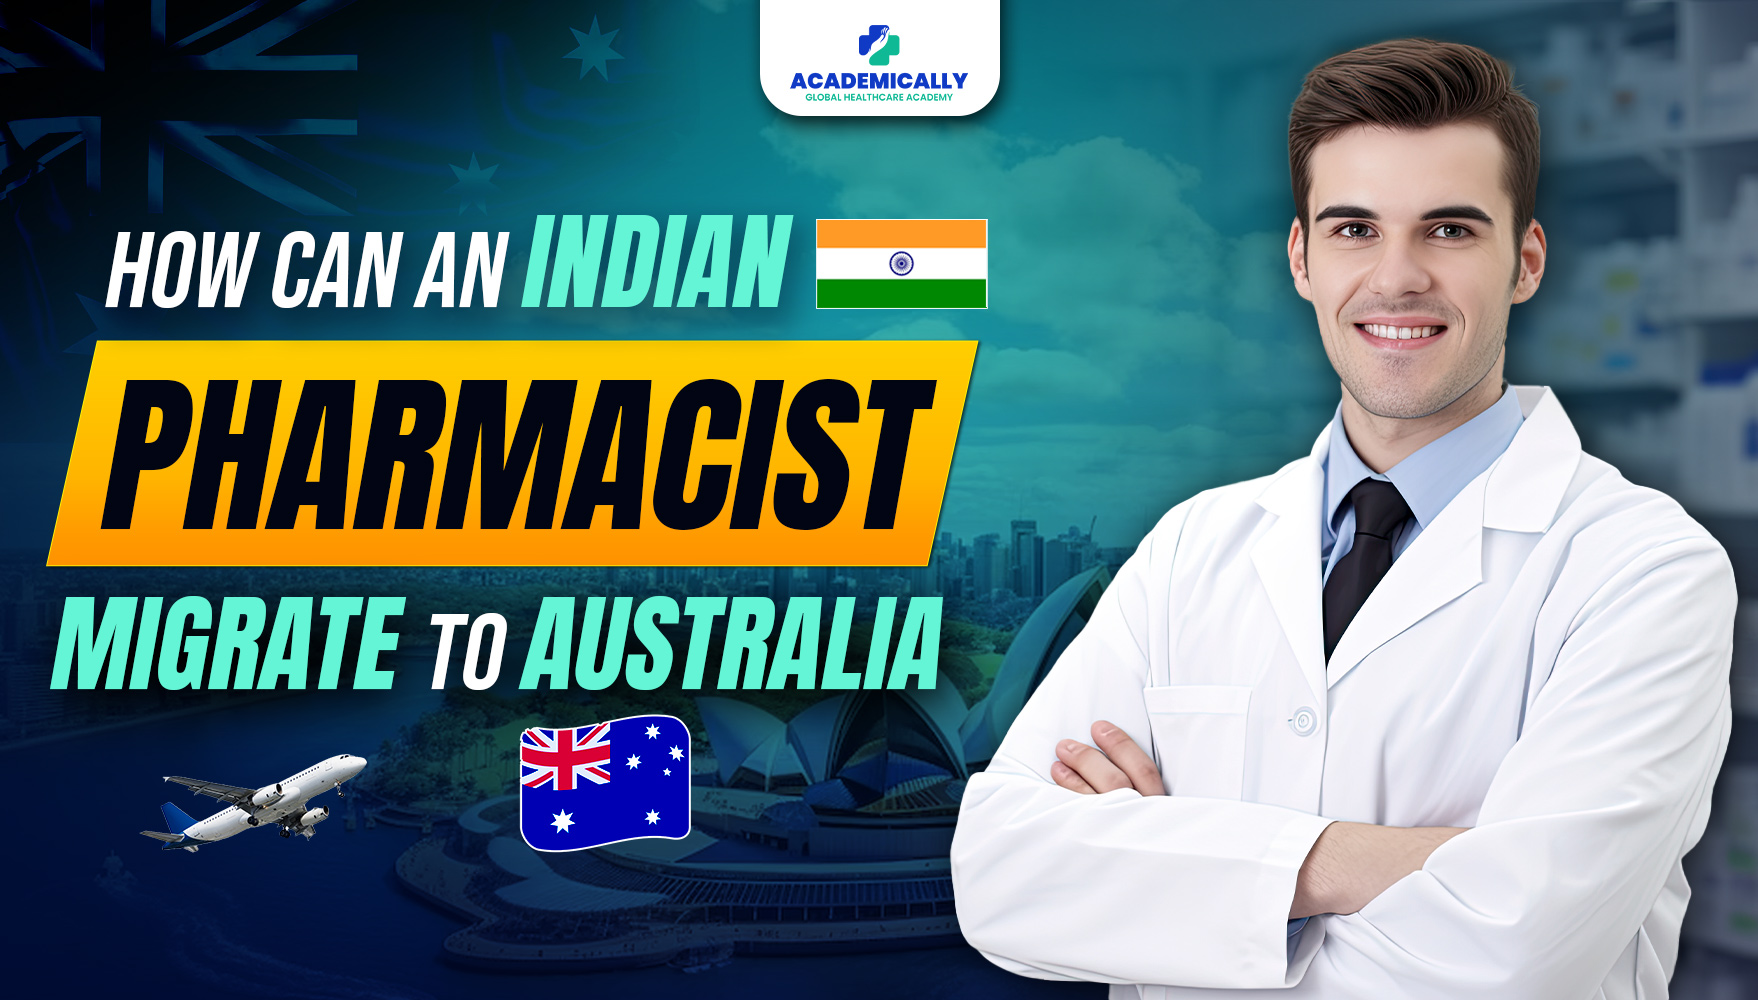 How Can an Indian Pharmacist Migrate to Australia: Step-by-Step Process